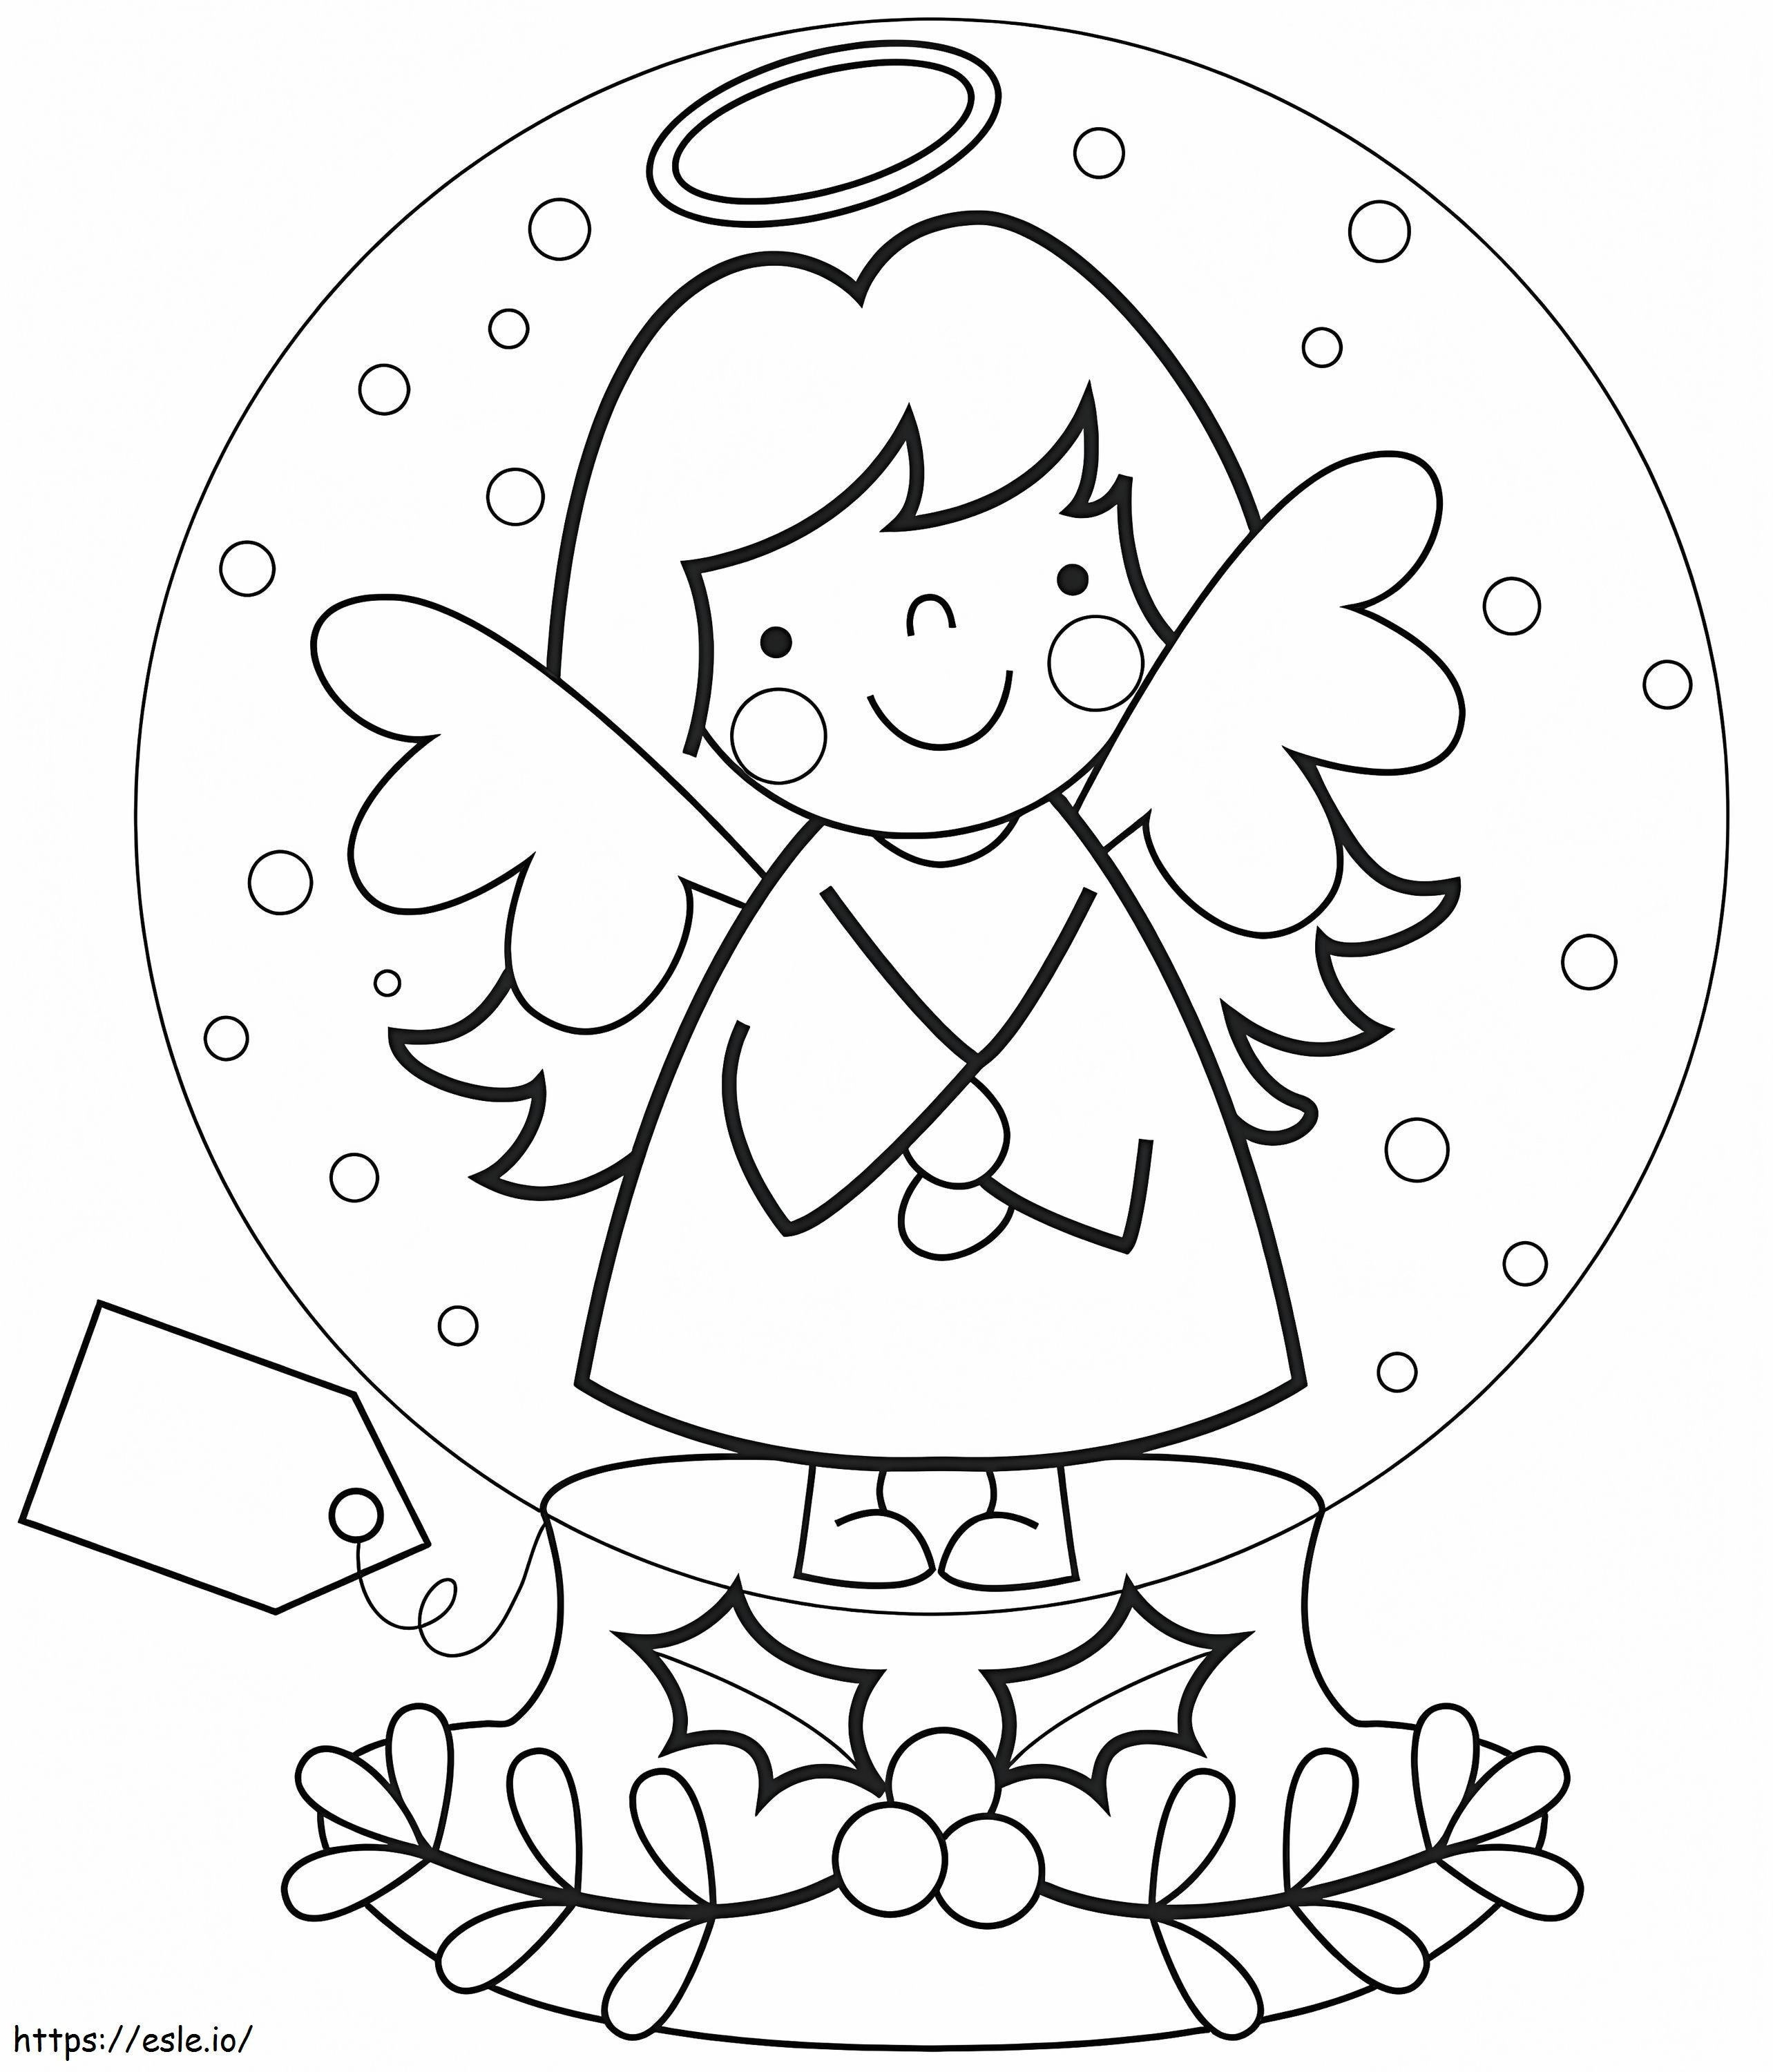 Cute Angel In Snow Globe coloring page